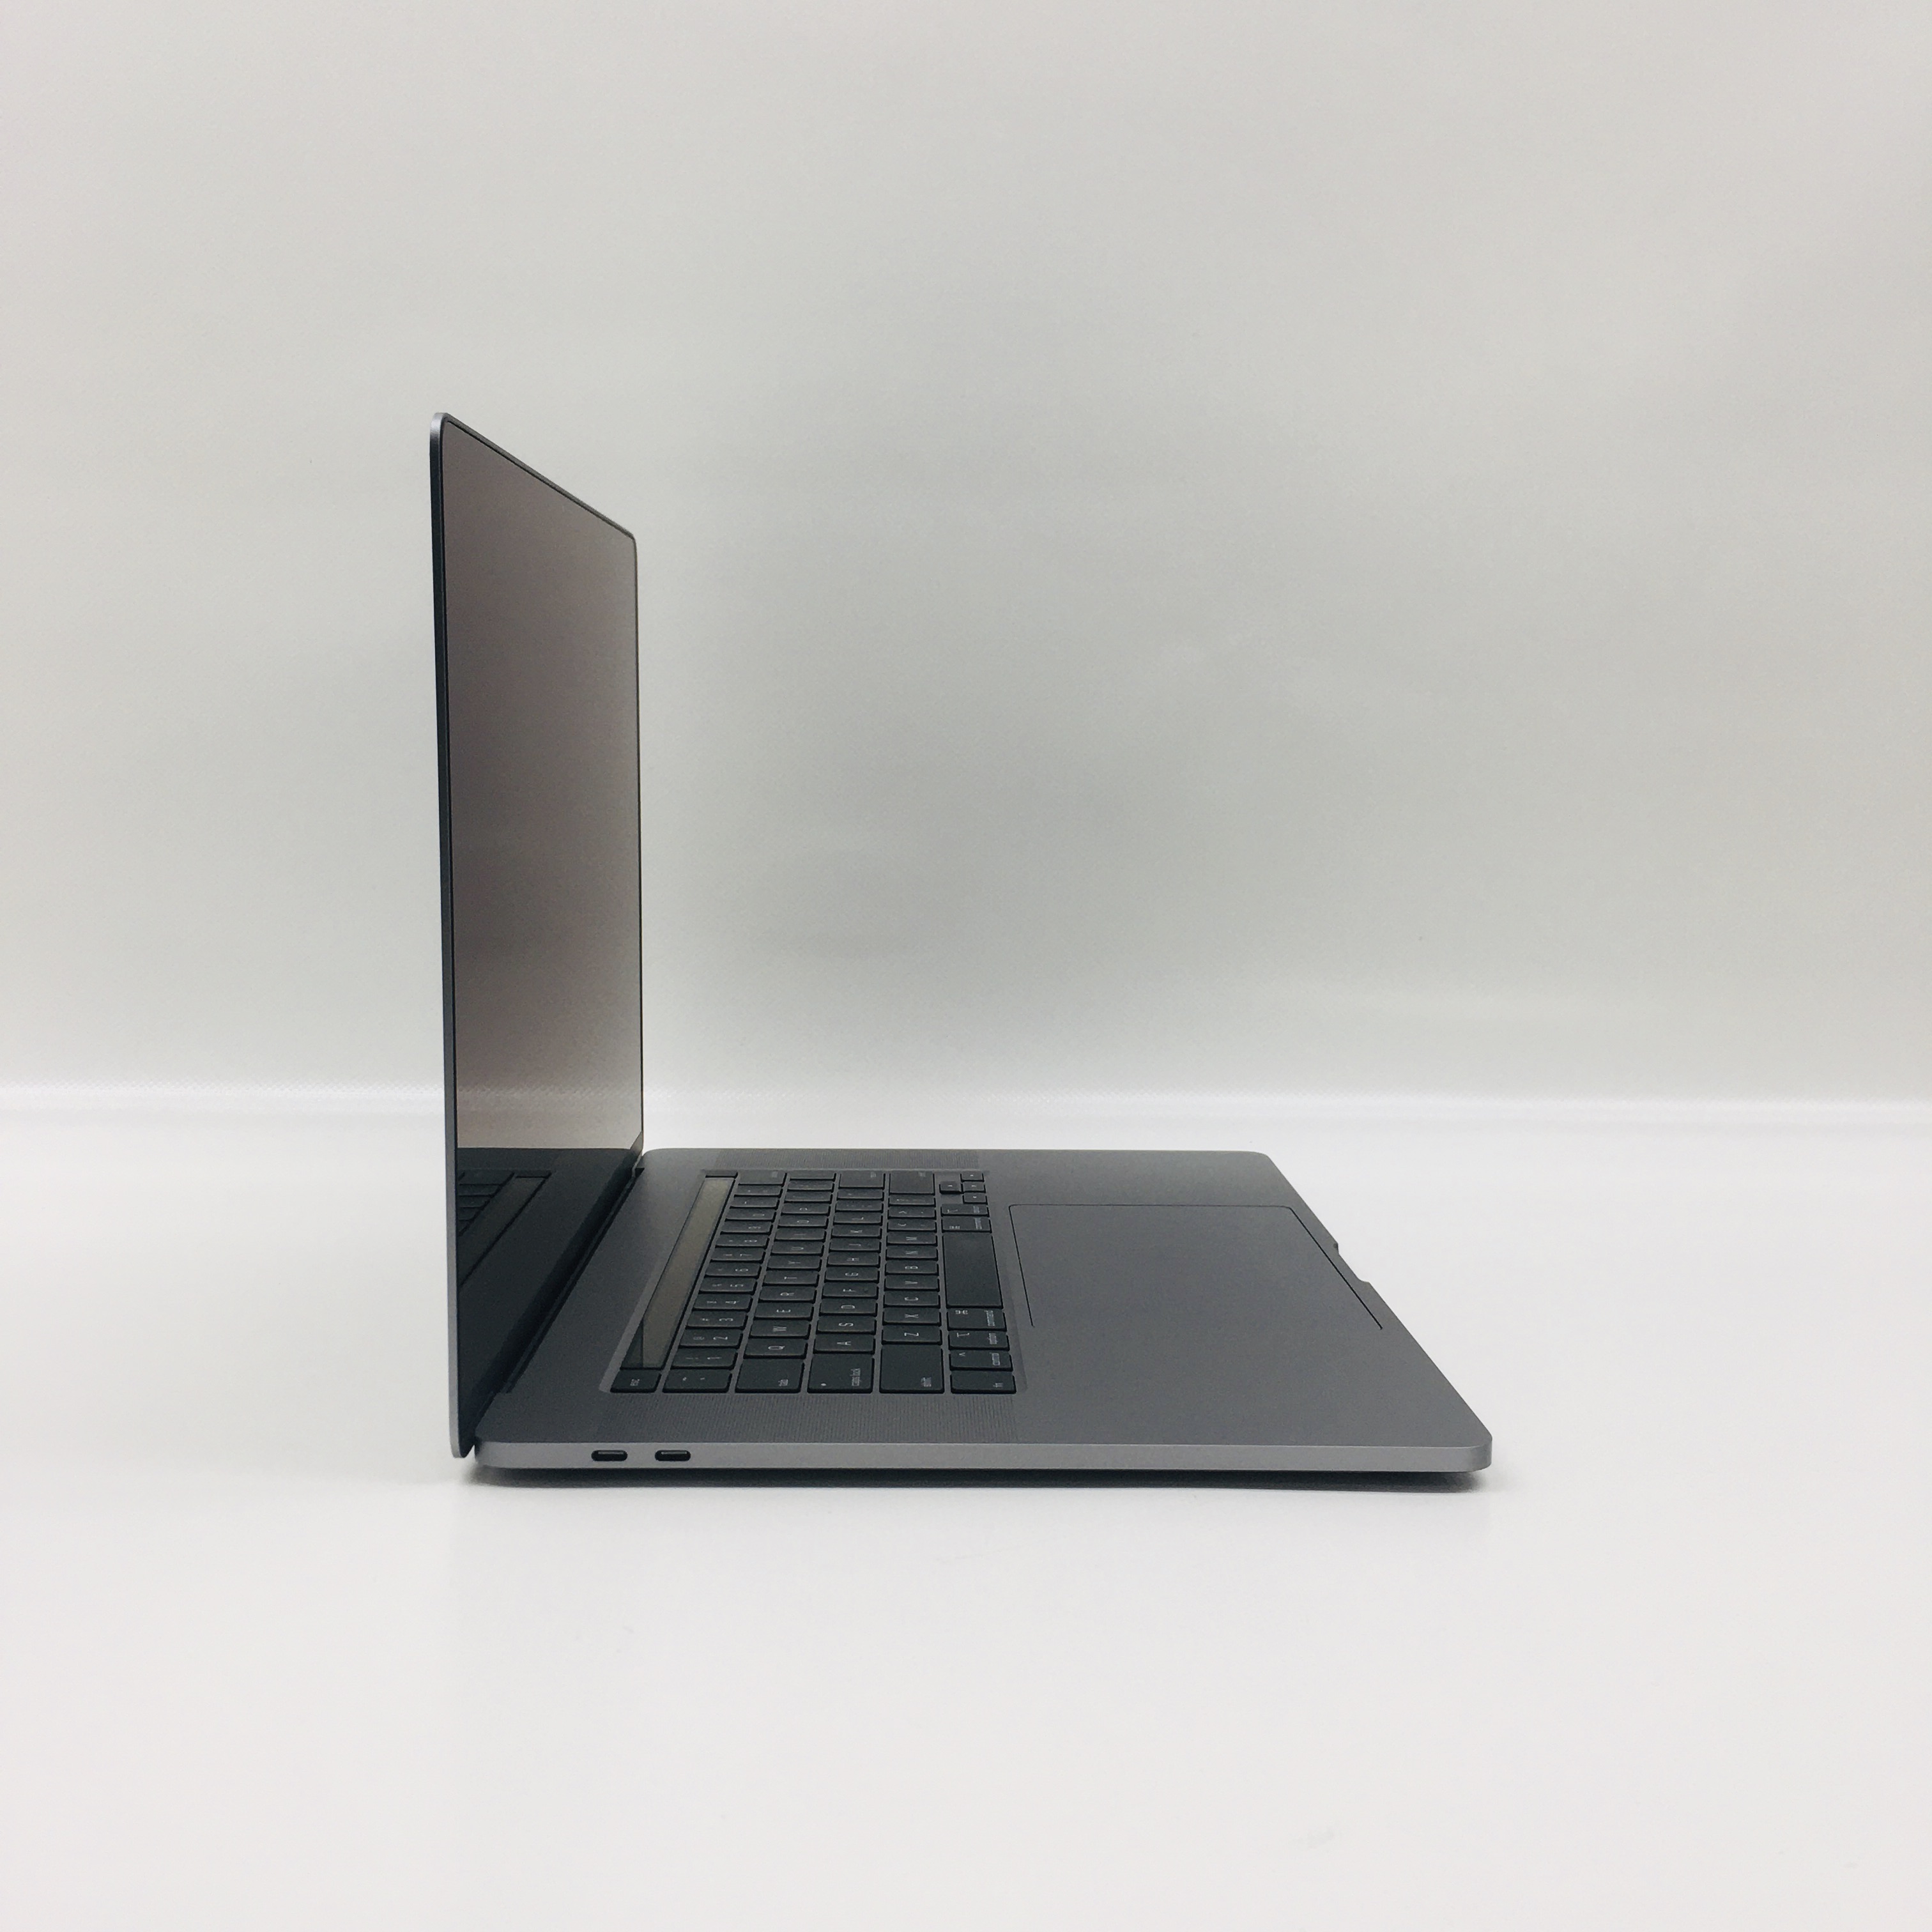 MacBook Pro 16" Touch Bar Late 2019 (Intel 6-Core i7 2.6 GHz 32 GB RAM 512 GB SSD), Space Gray, Intel 6-Core i7 2.6 GHz, 32 GB RAM, 512 GB SSD, image 2